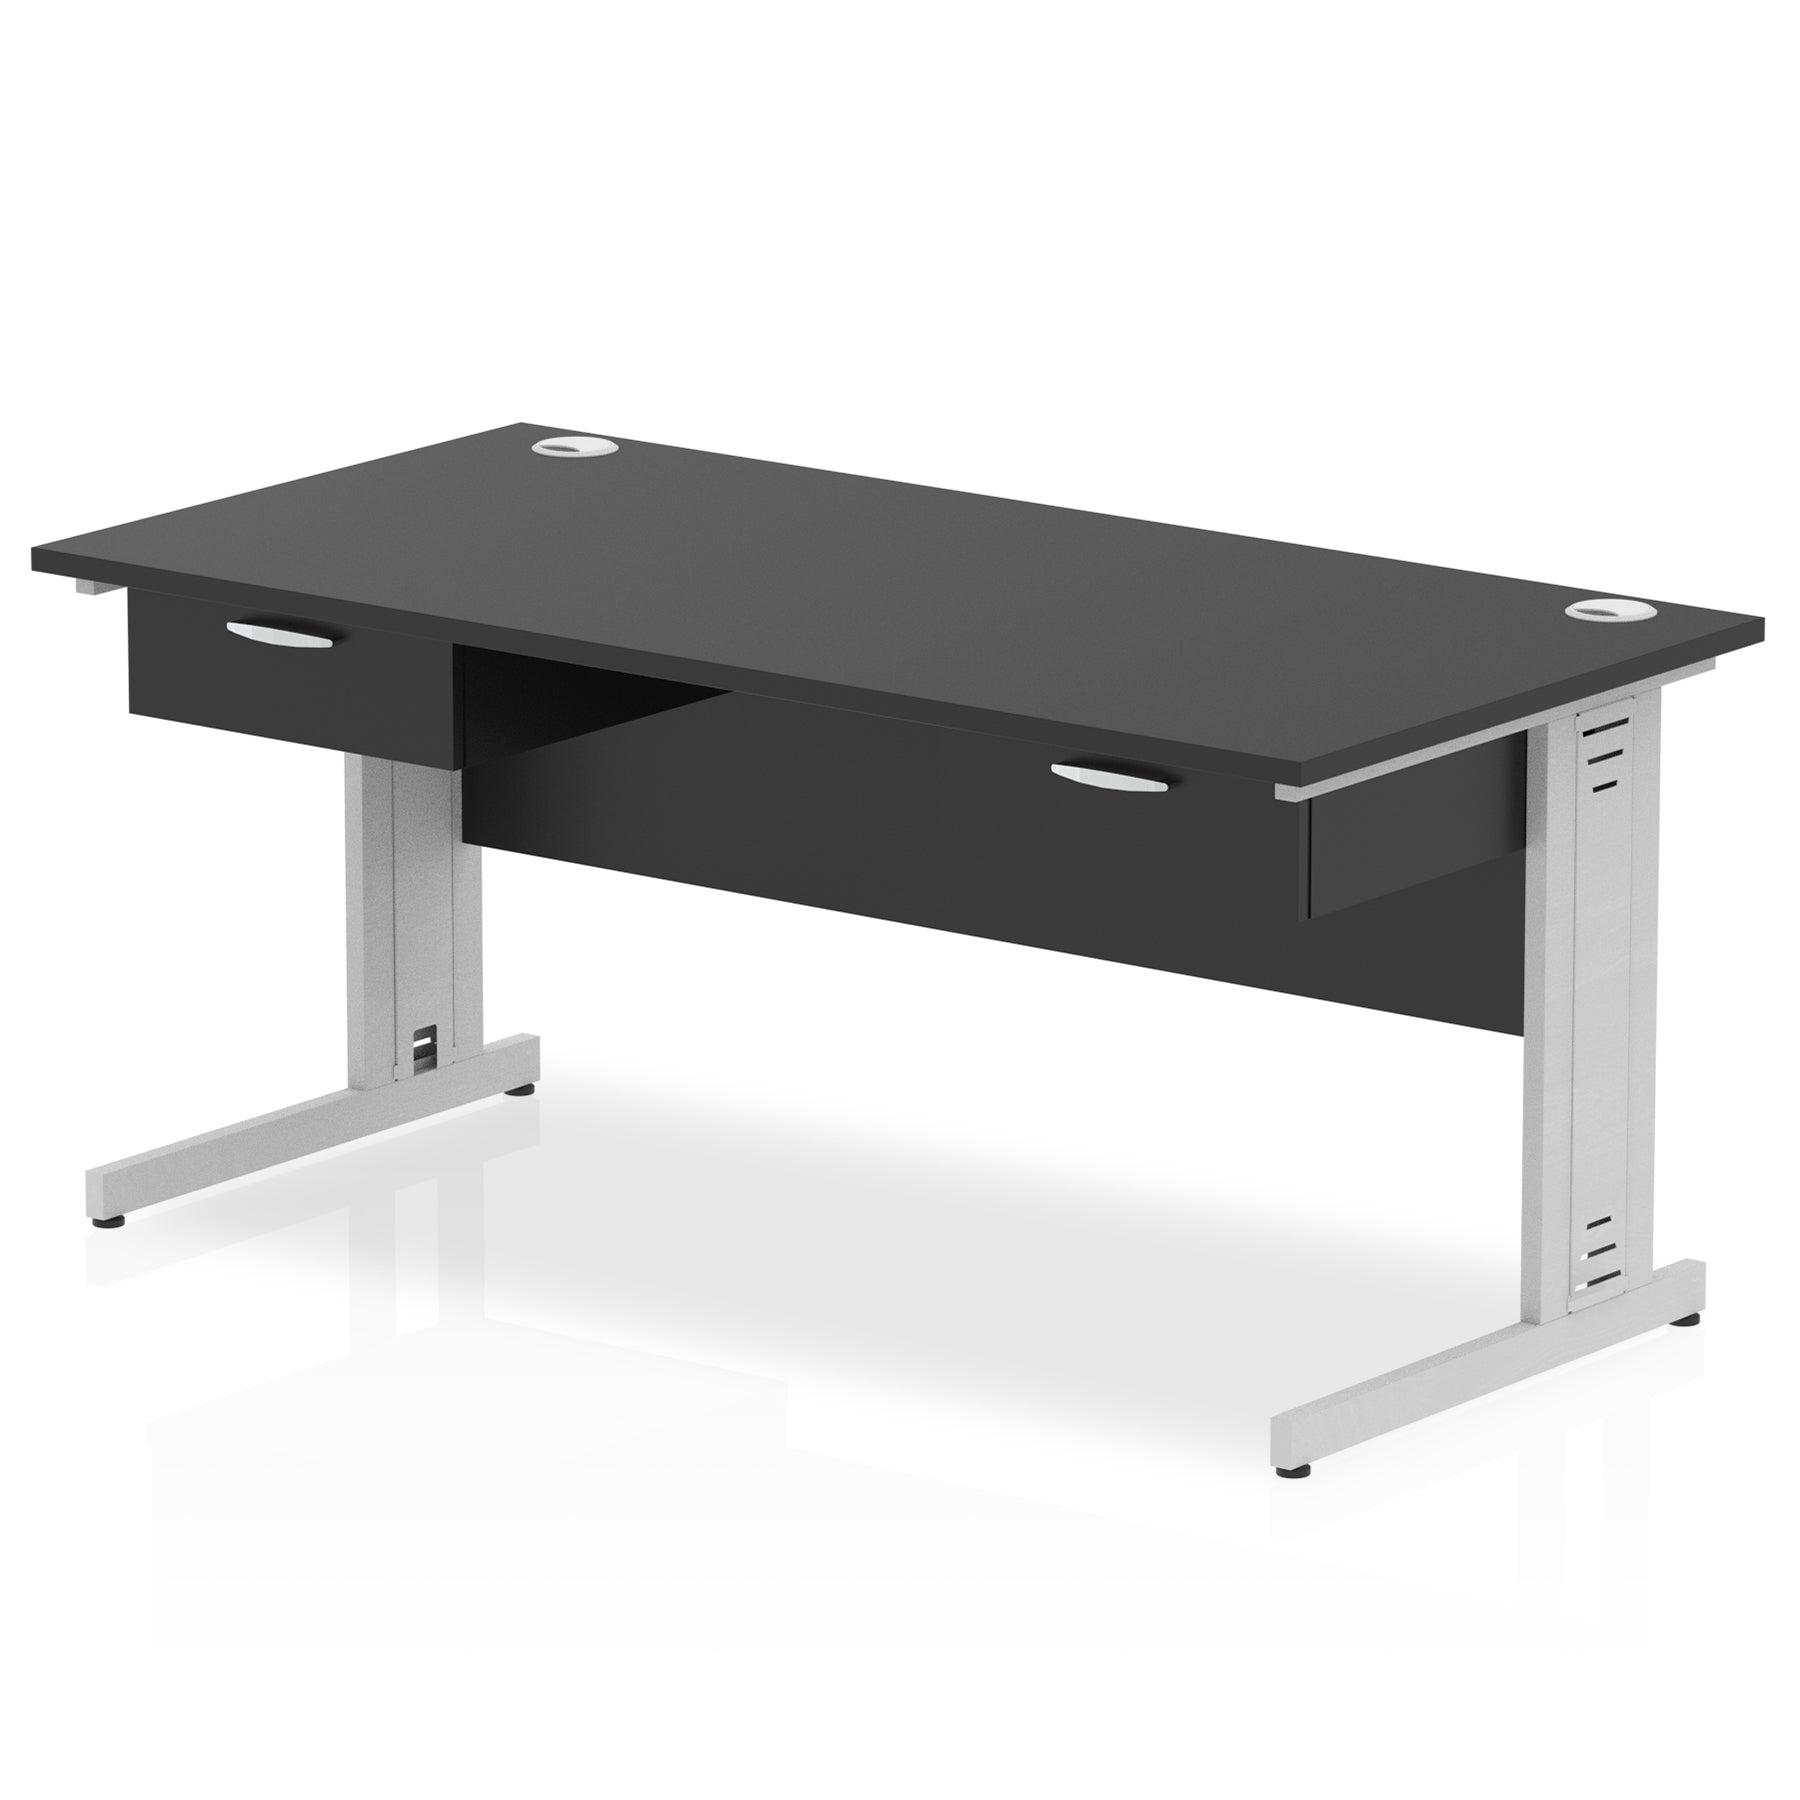 Impulse Cable Managed Straight Desk Silver Frame With Two One Drawer Fixed Pedestals